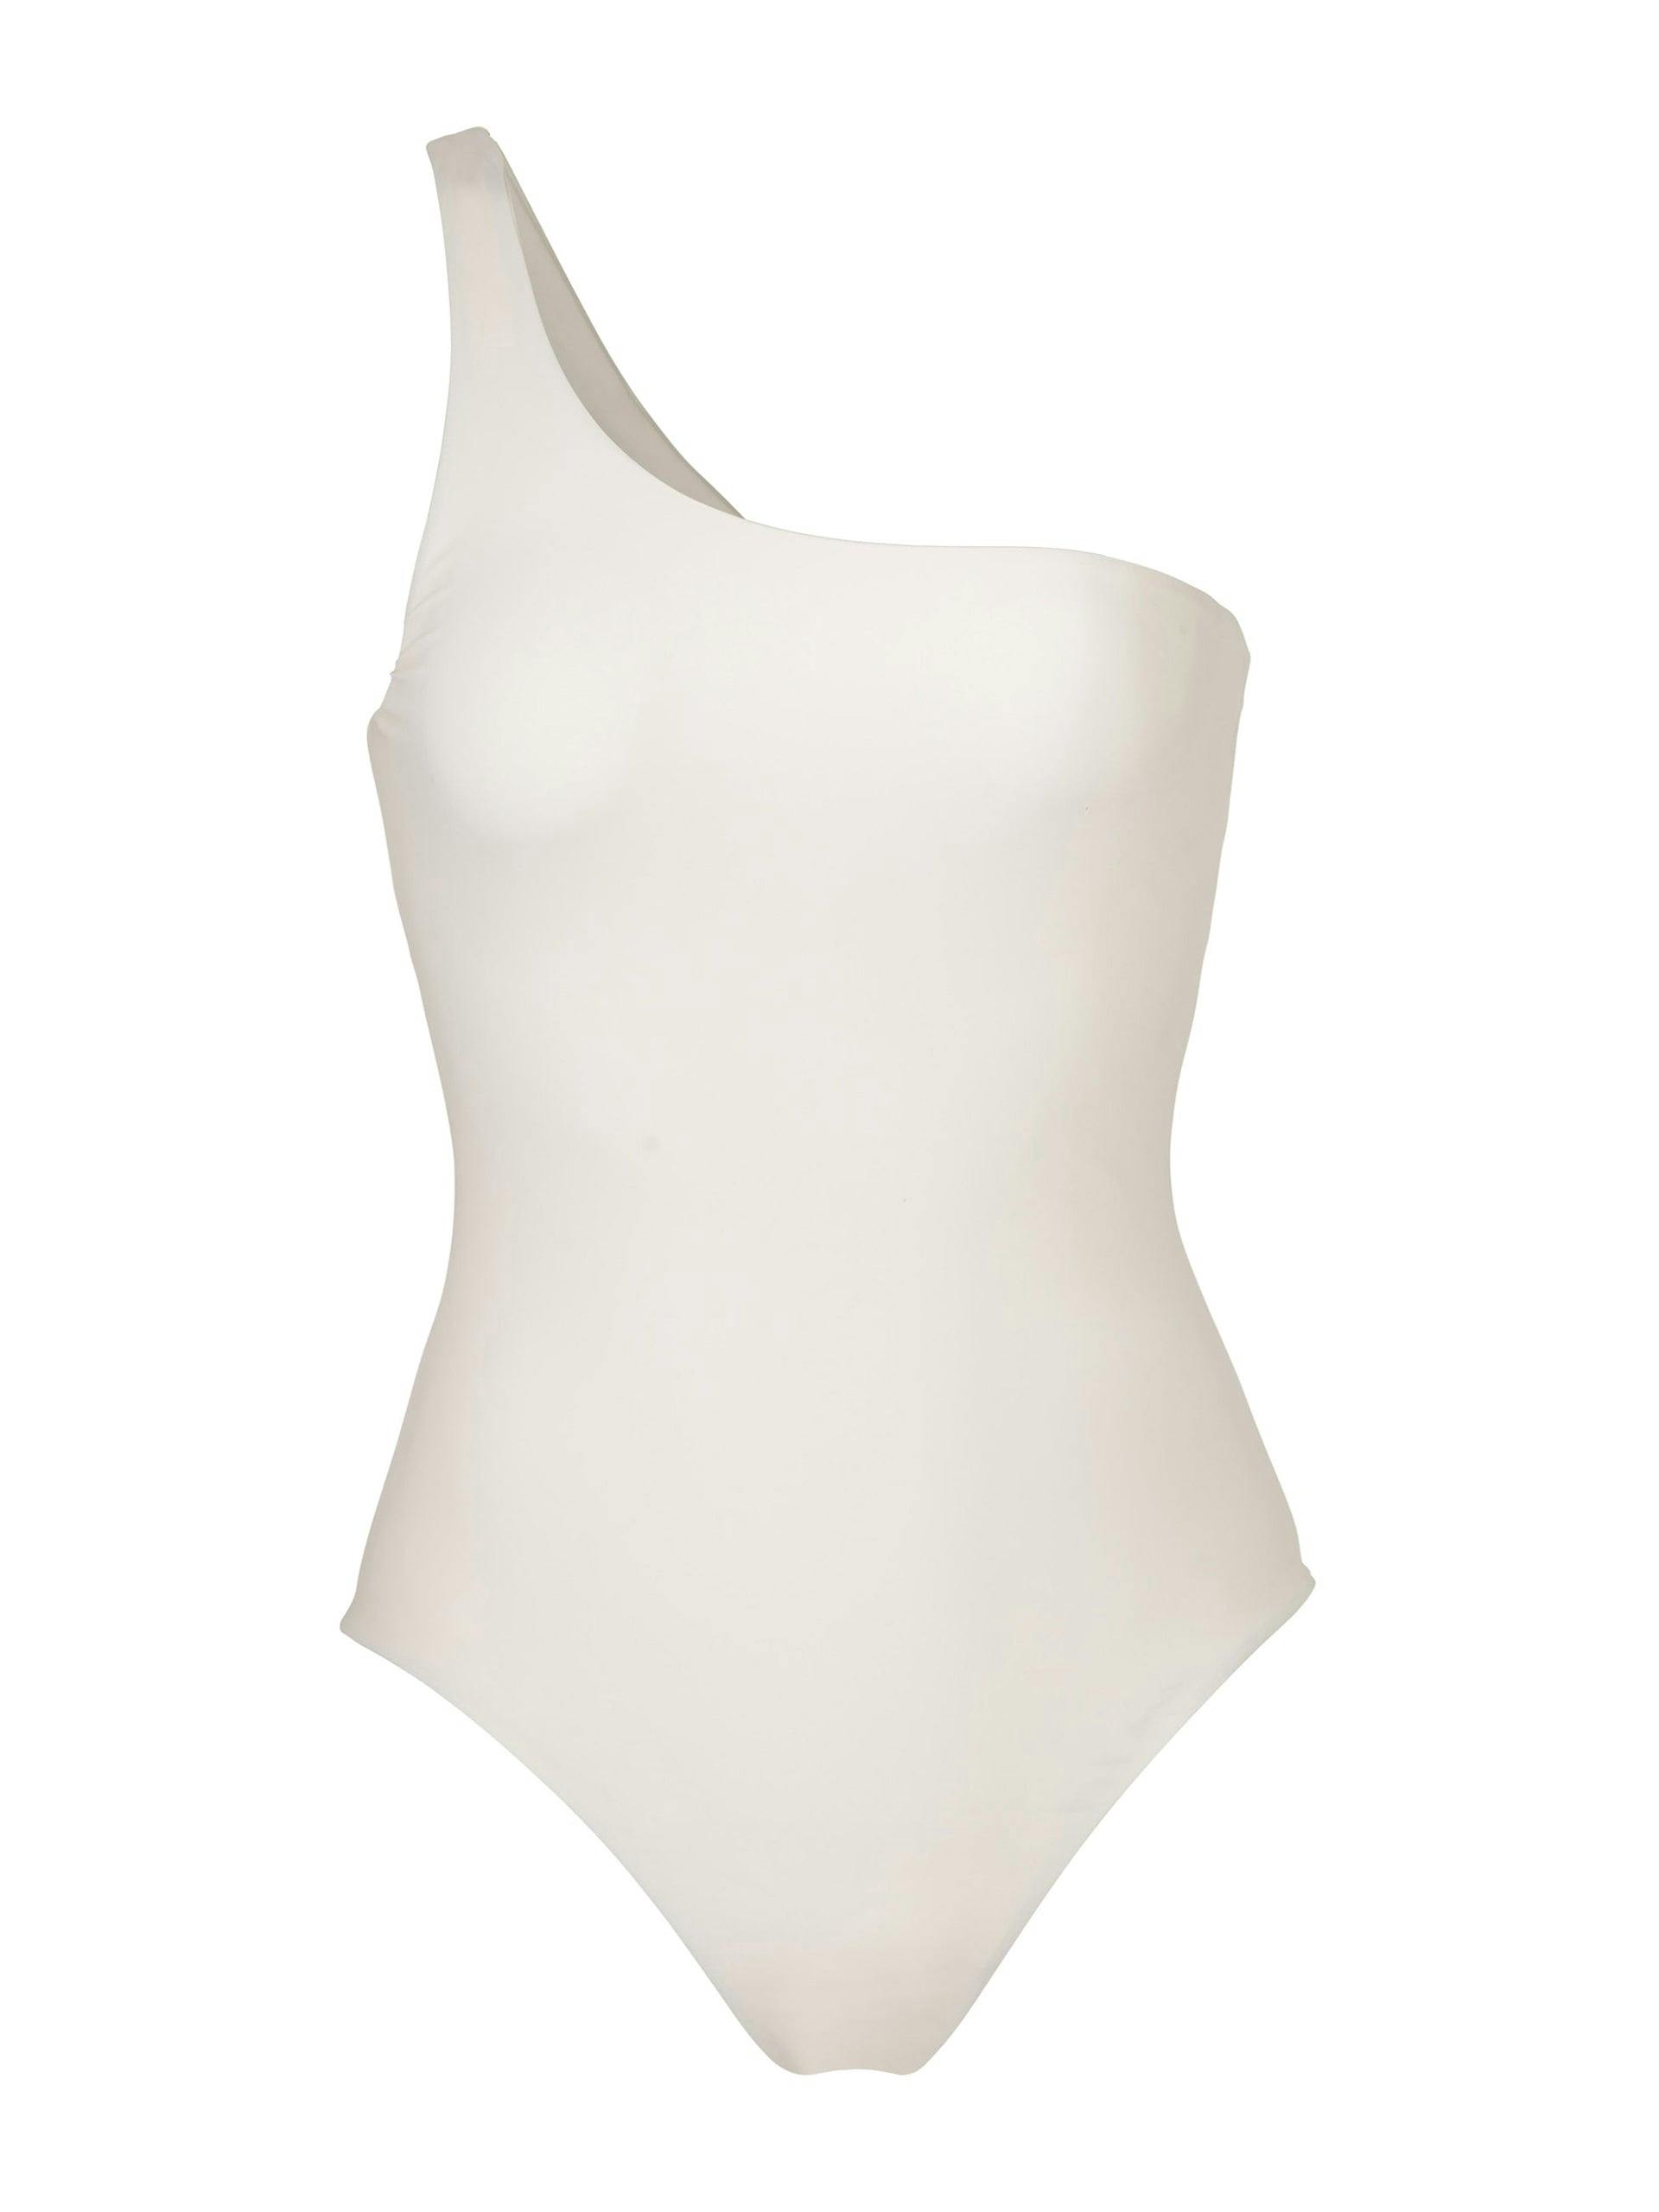 The One-Shoulder swimsuit